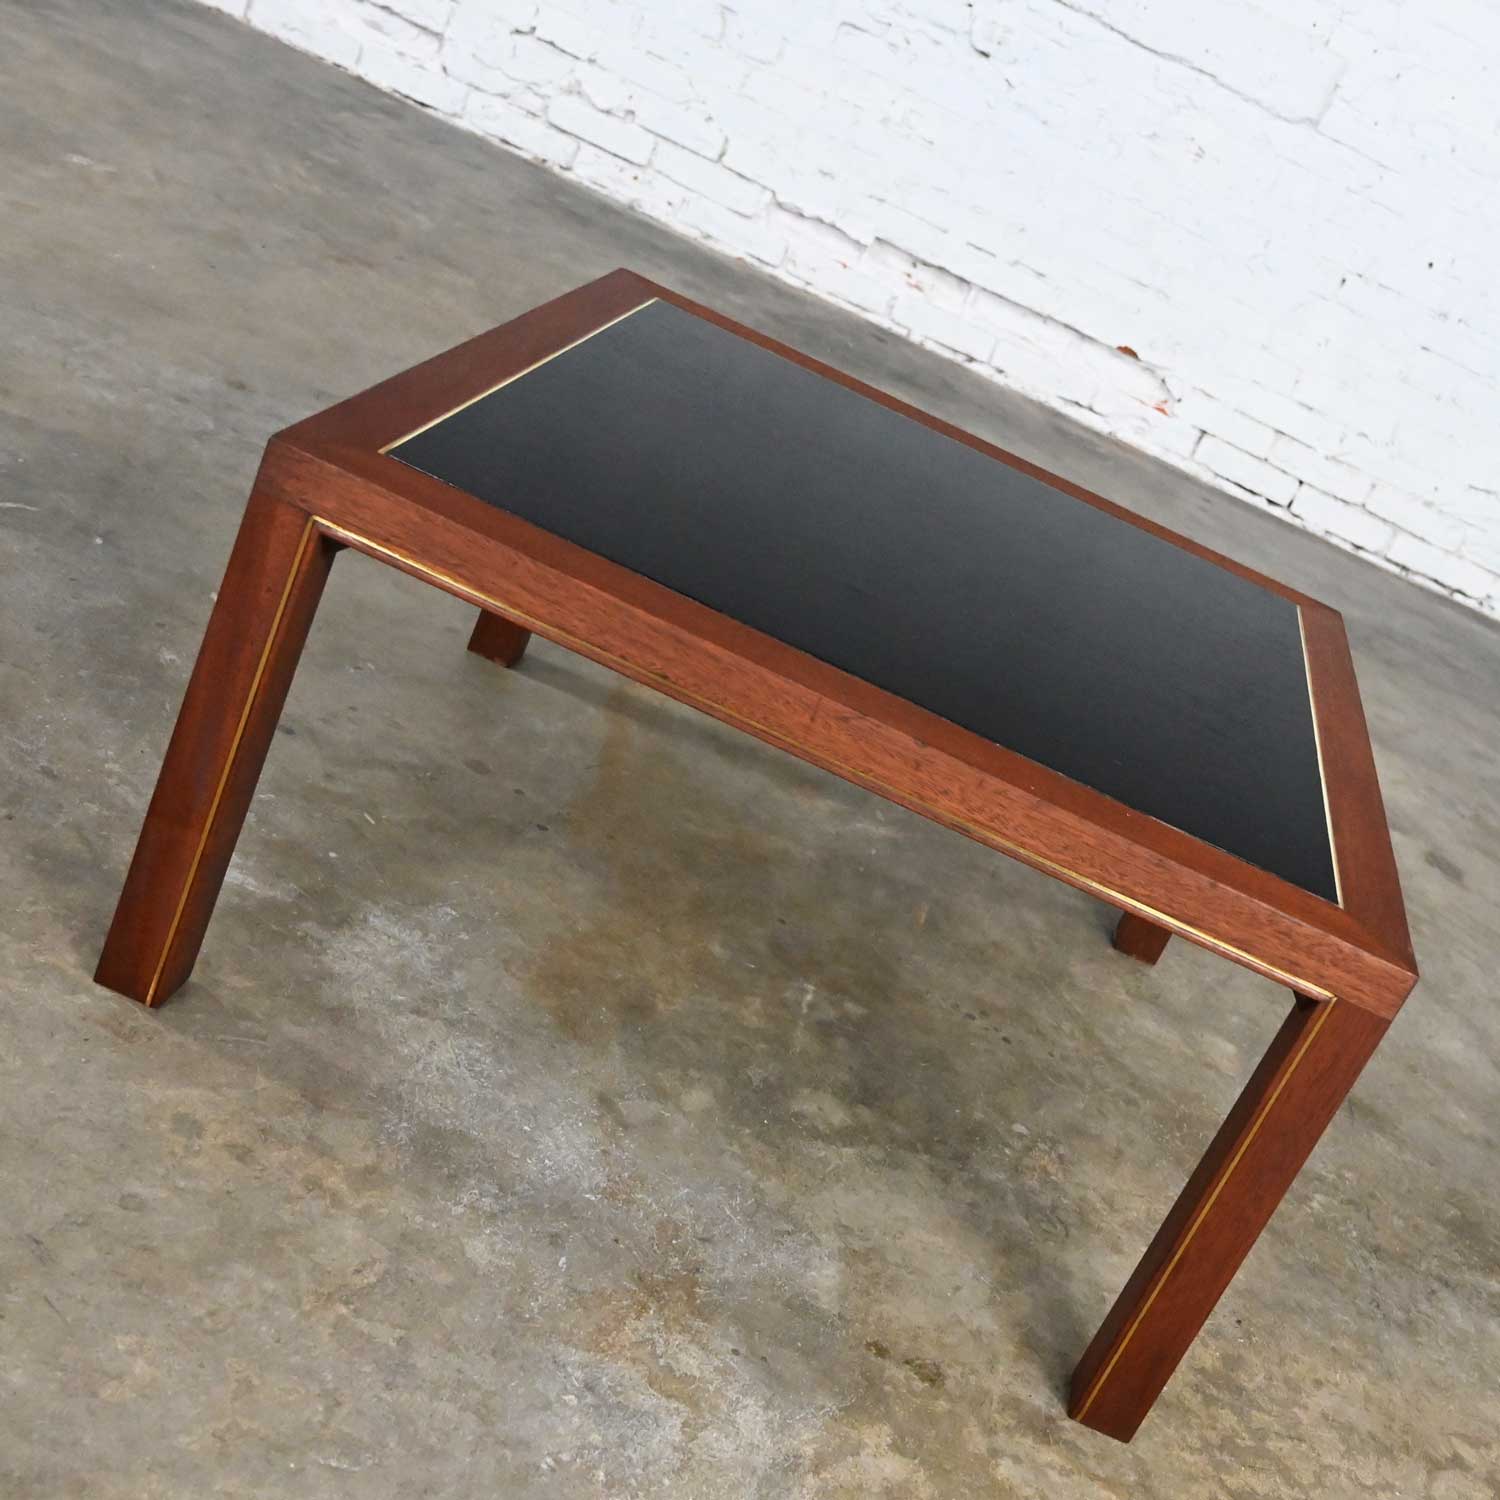 MCM to Modern Dunbar Coffee or End Table Square Parsons Style Inlaid Brass Detail by Edward Wormley